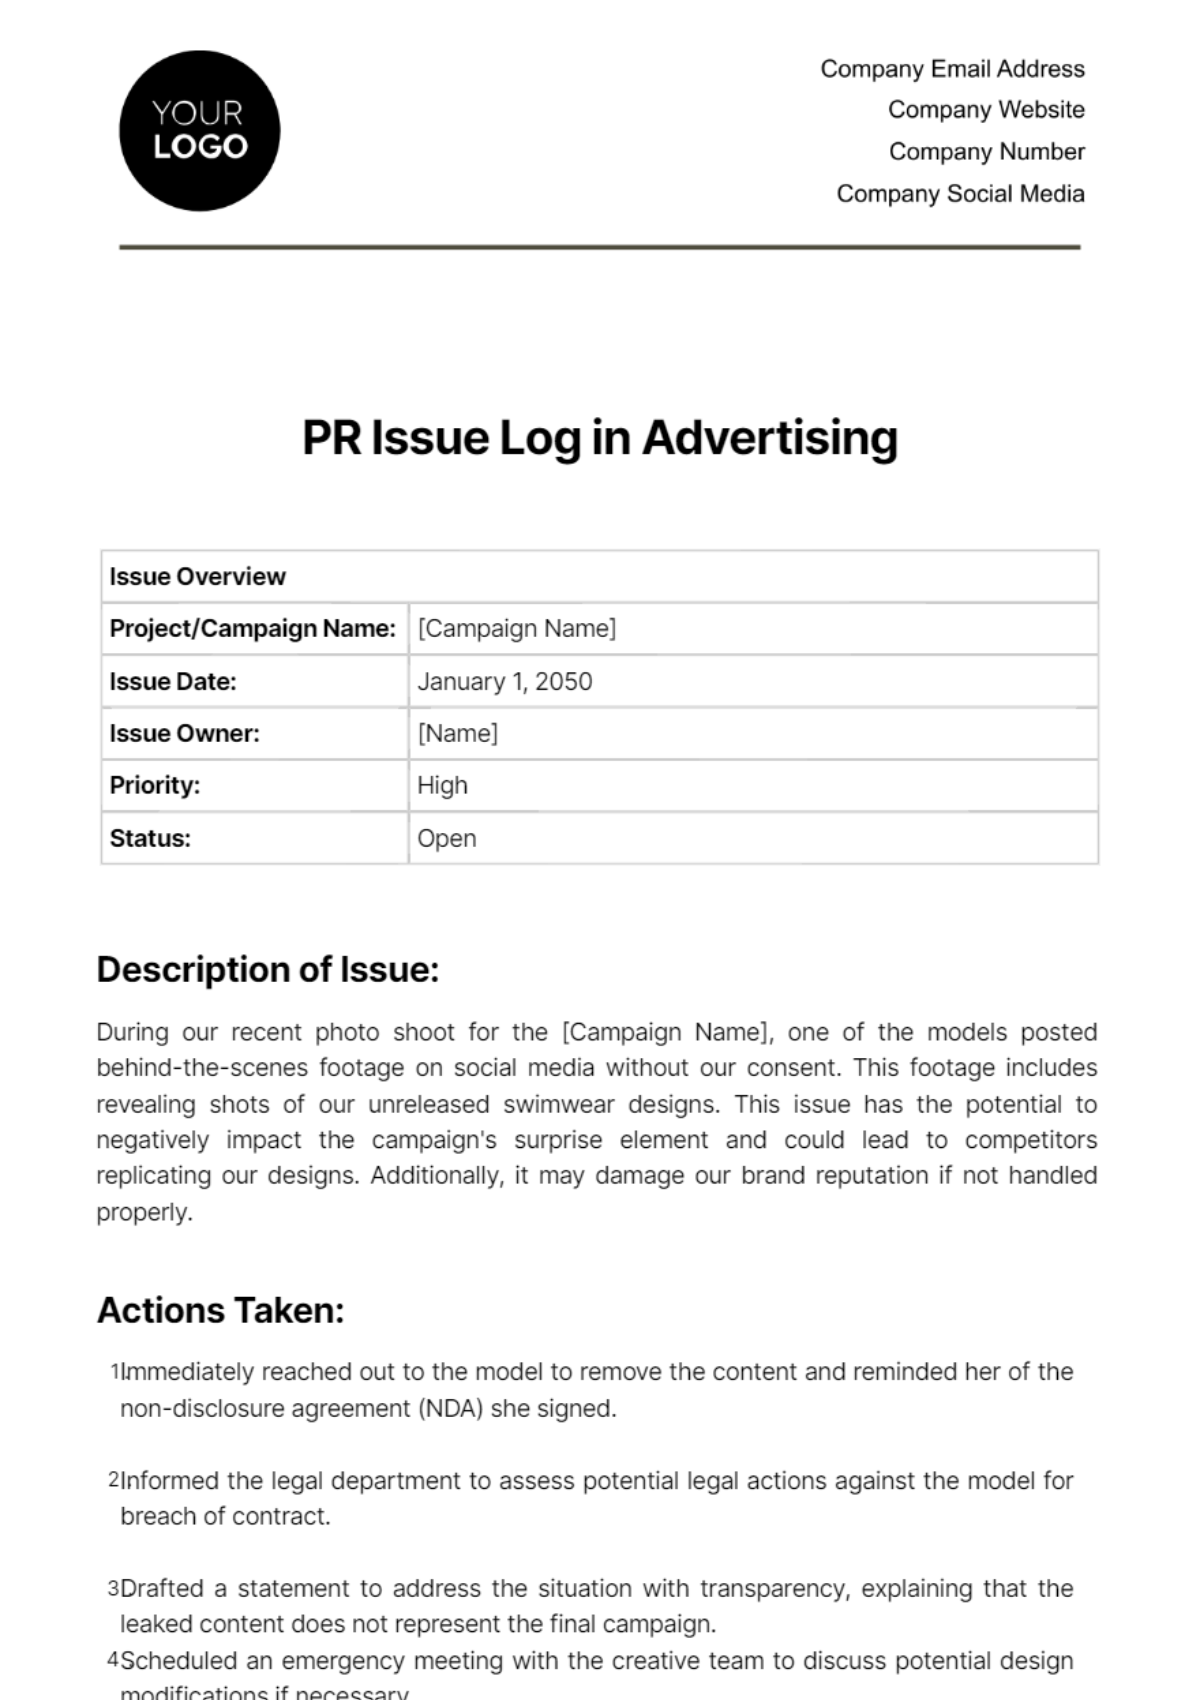 PR Issue Log in Advertising Template